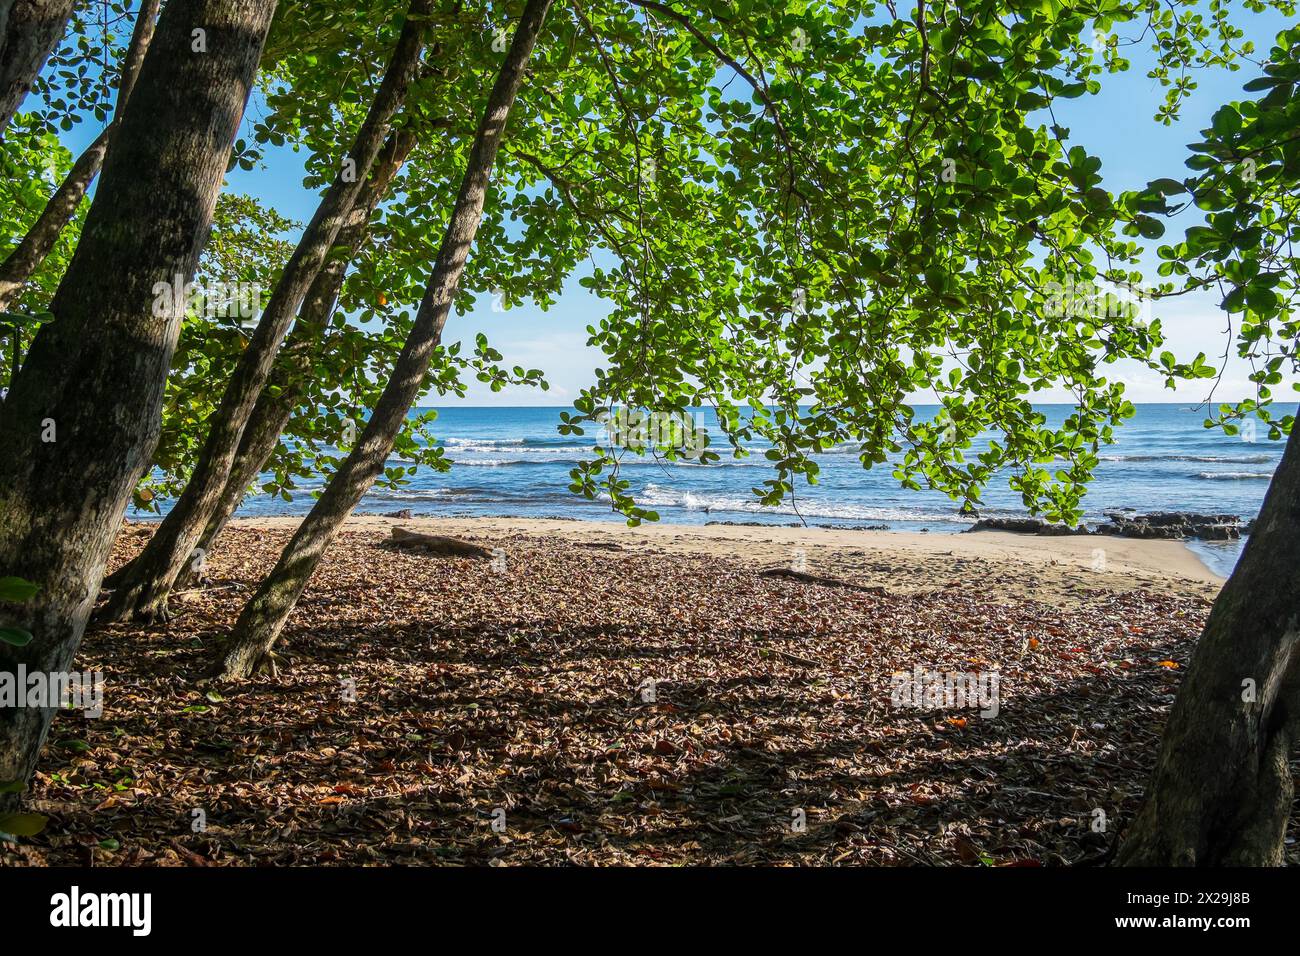 Forest and beach on the coast of Puerto Viejo de Talamanca in Costa Rica Stock Photo